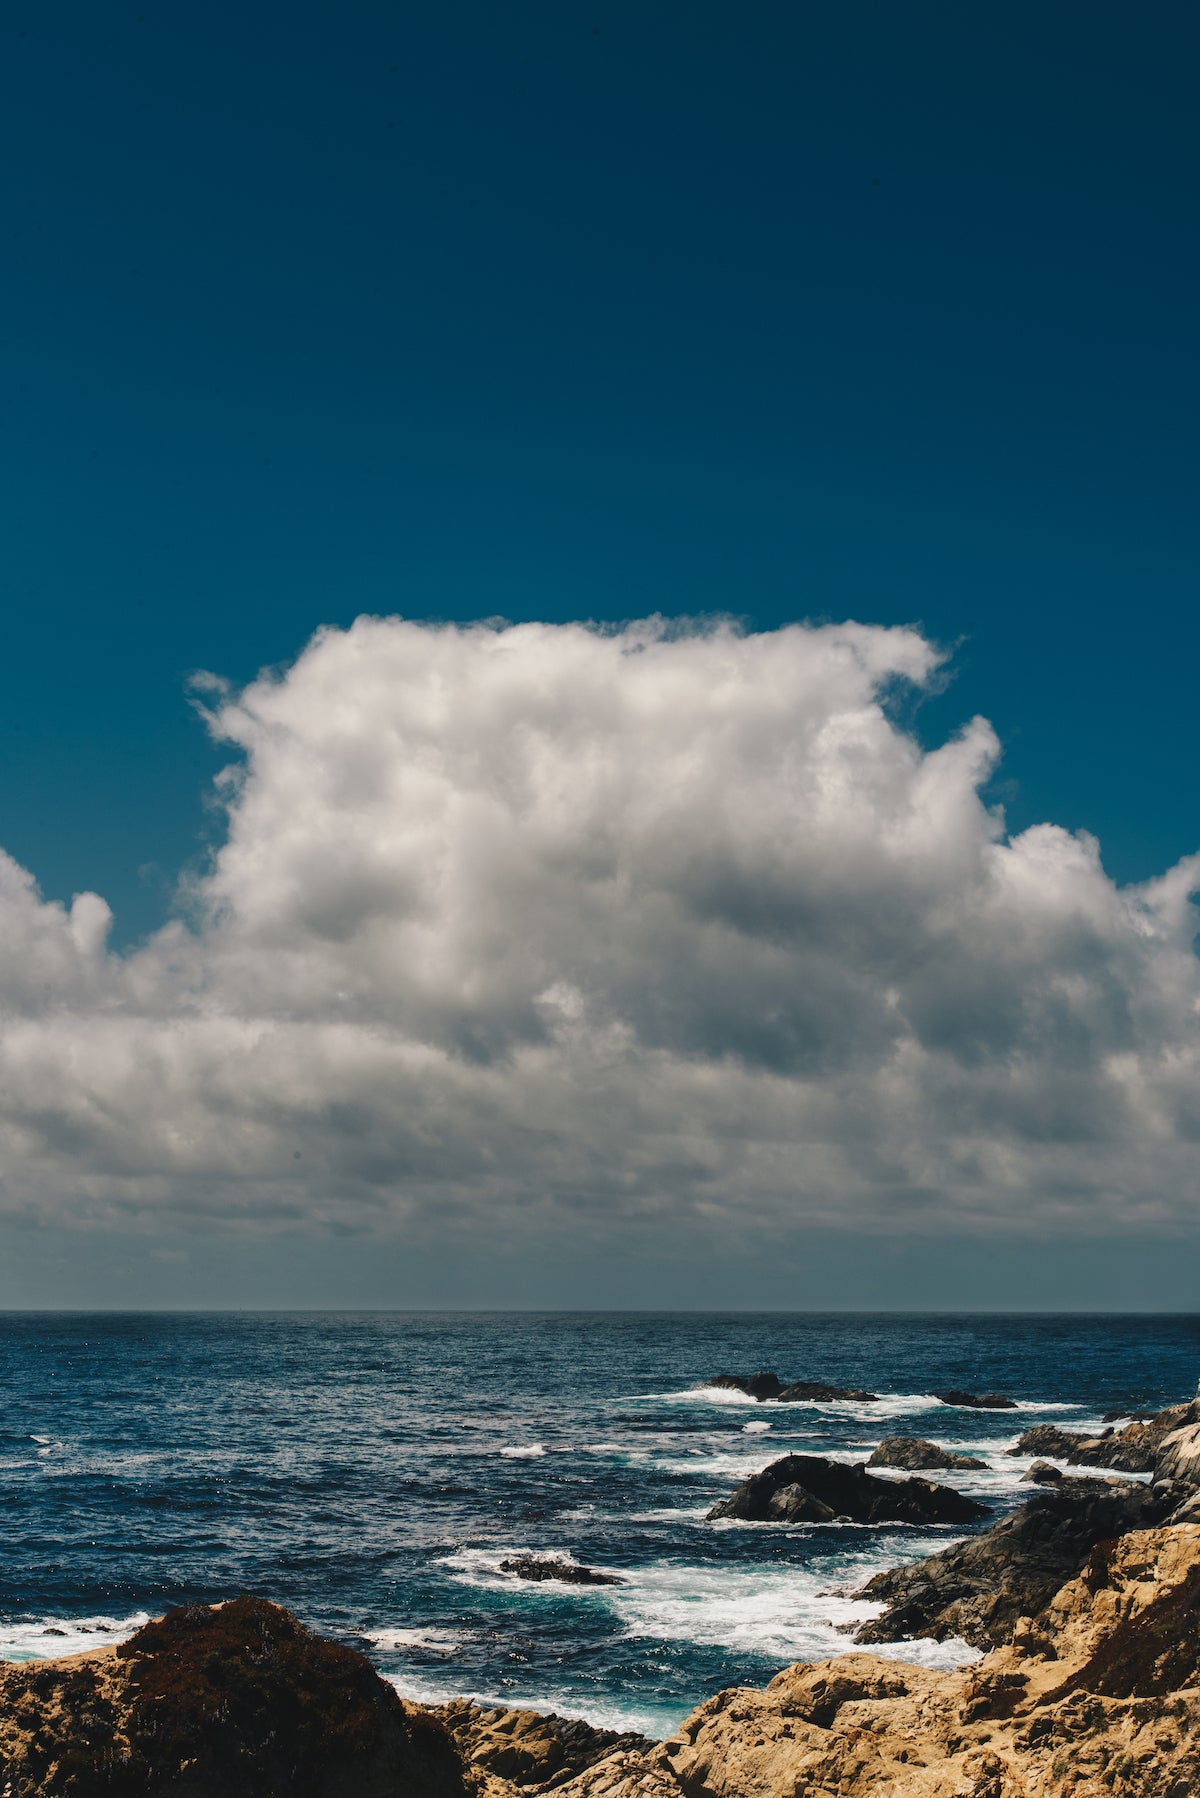 A cloud over the ocean and shoreline